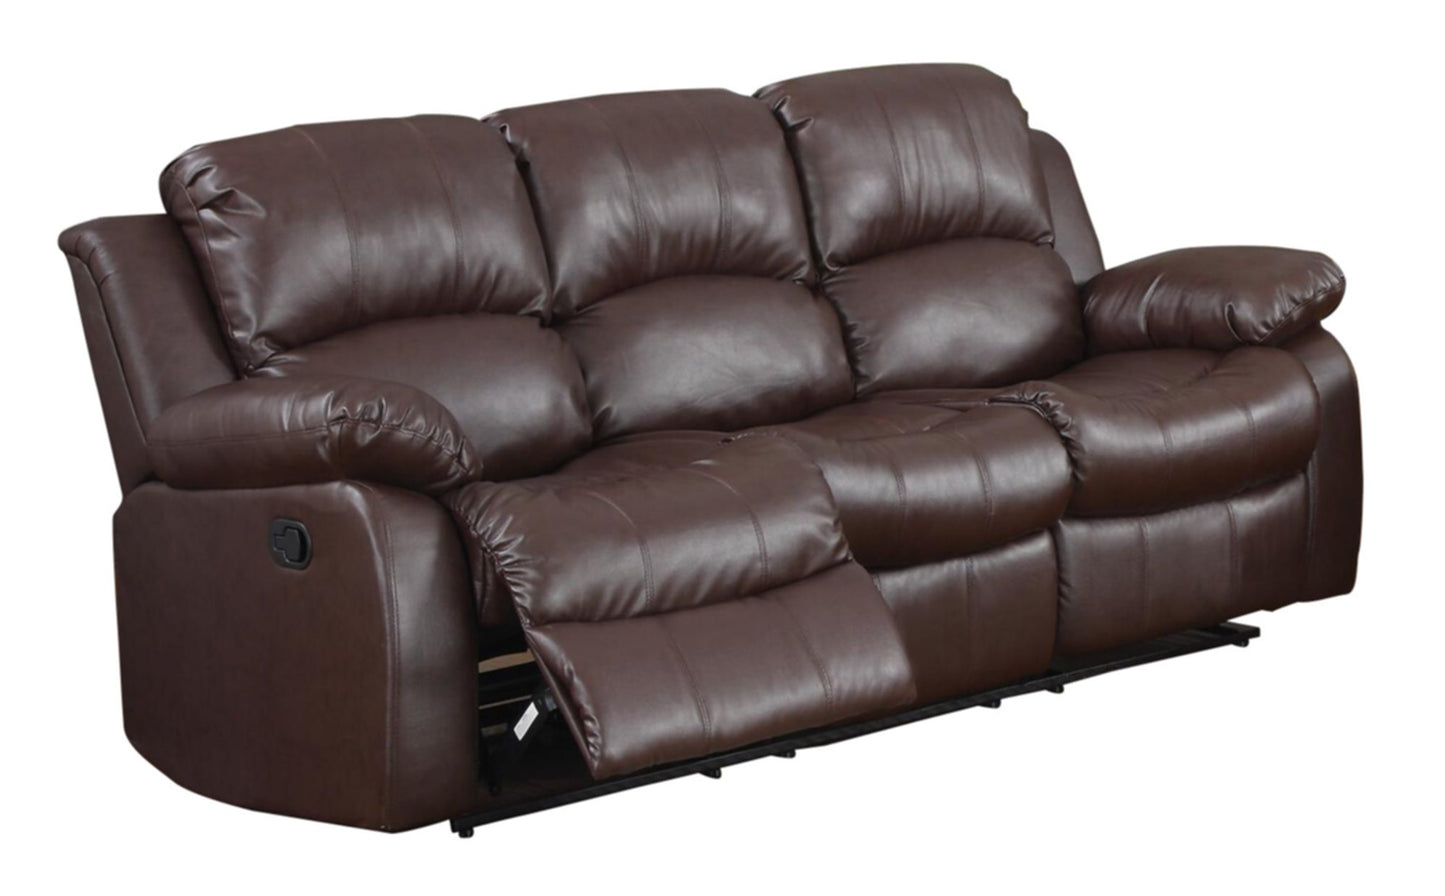 Homelegance Cranley 2PC Set Double Reclining Sofa & Love Seat in Leather - Brown